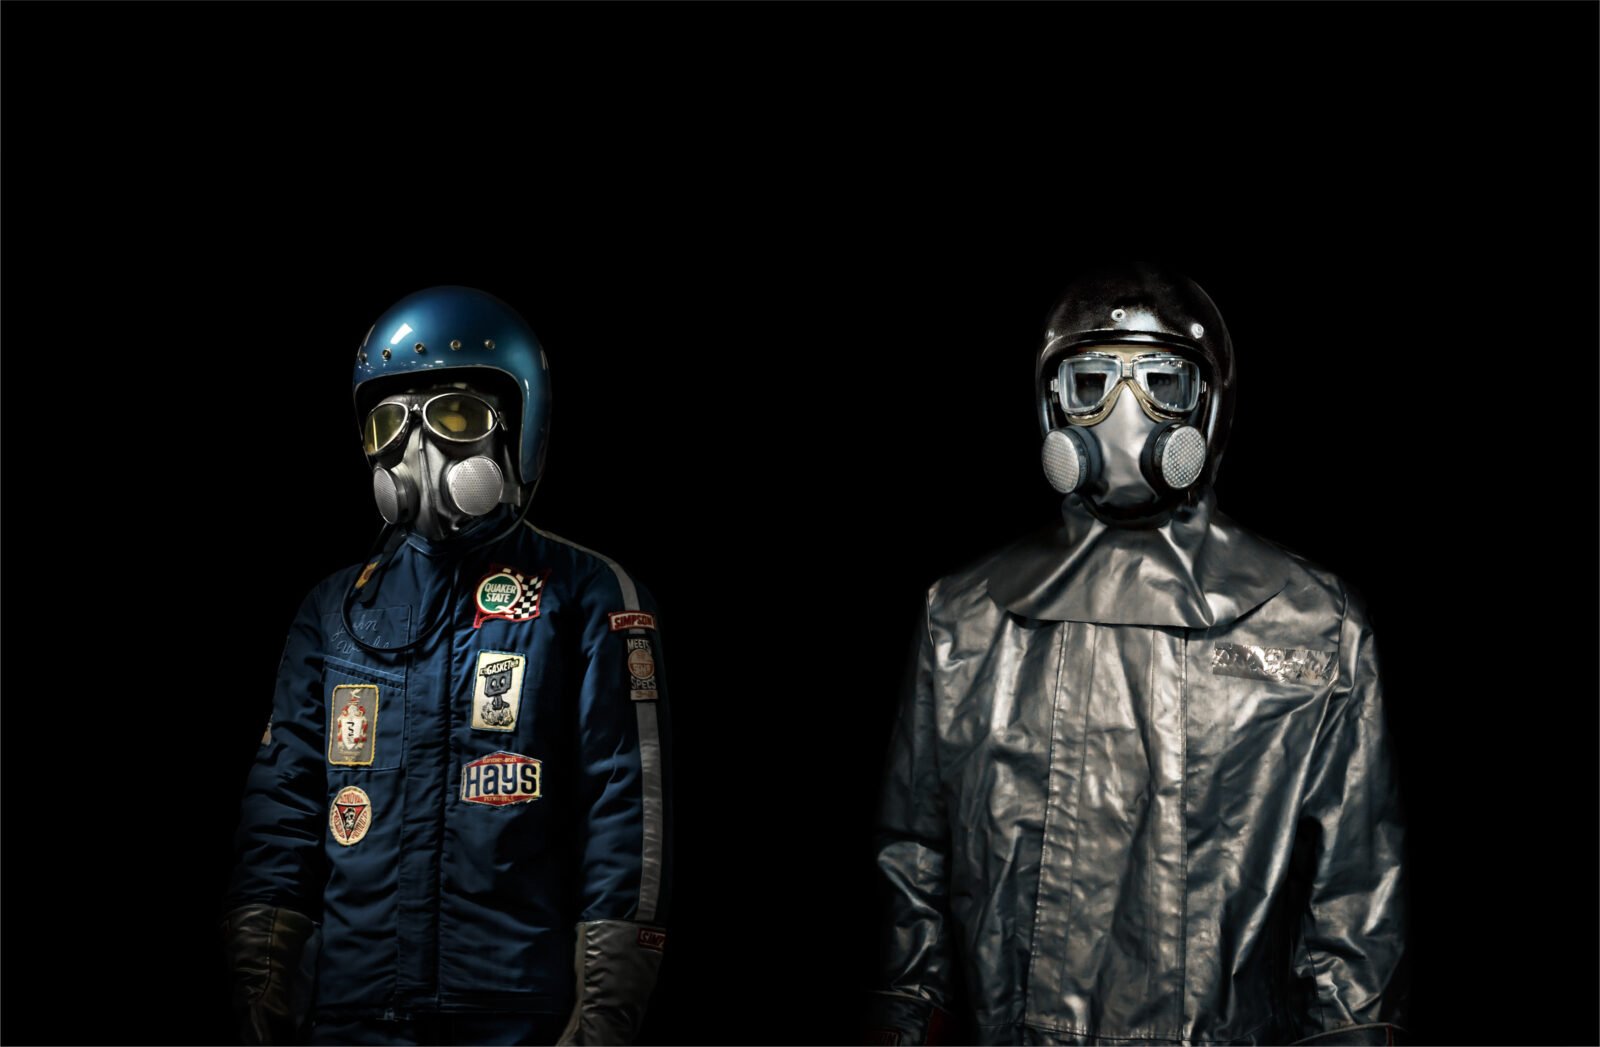 Dragster Drivers By Photographer Benedict Redgrove